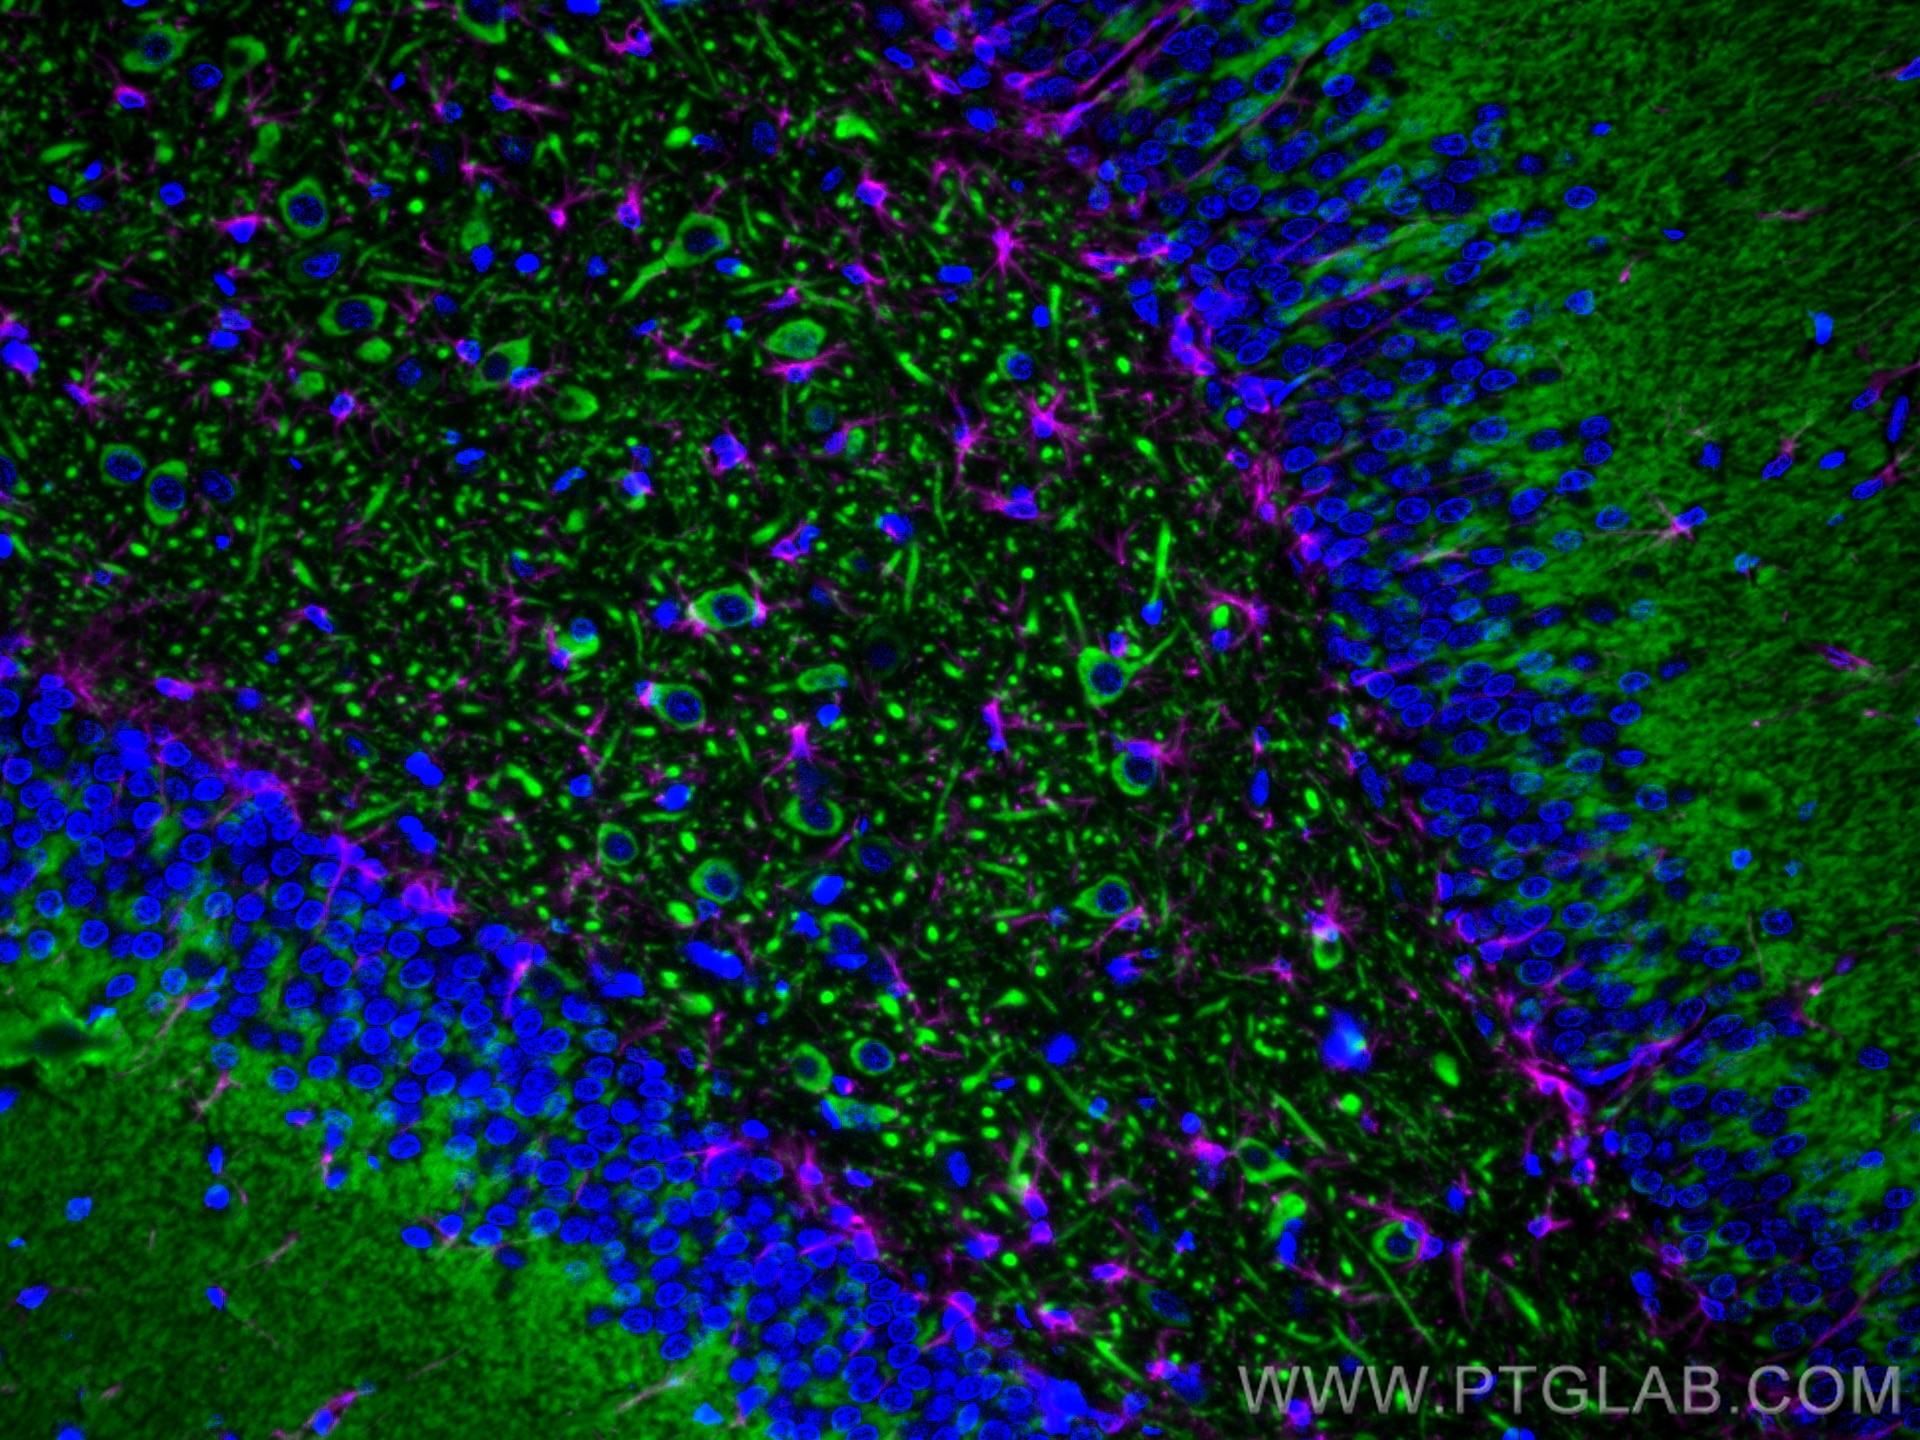 Immunofluorescence of rat brain: FFPE rat brain sections were stained with anti-MAP2 antibody (17490-1-AP, green) labeled with FlexAble HRP Antibody Labeling Kit for Rabbit IgG (KFA005) and Tyramide-488, and anti-GFAP antibody (60190-1-AP, magenta) labeled with FlexAble HRP Antibody Labeling Kit for Mouse IgG2a (KFA045) and Tyramide-650. Cell nuclei are in blue.